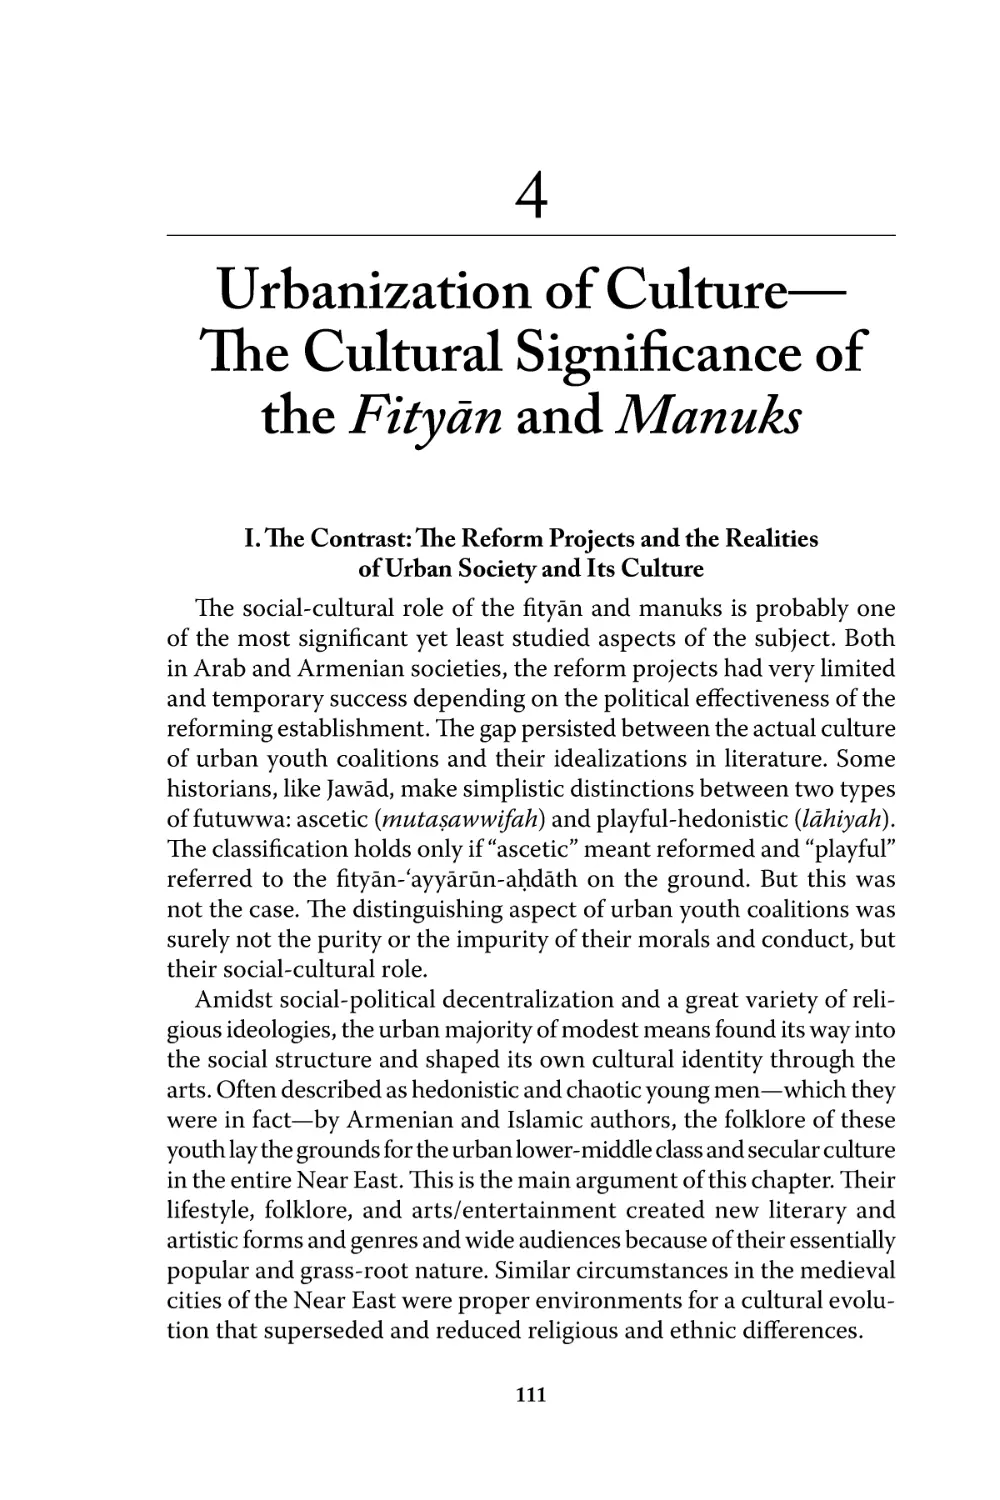 4 Urbanization of Culture—The Cultural Signiﬁcance of the Fityān and Manuks
I. The Contrast